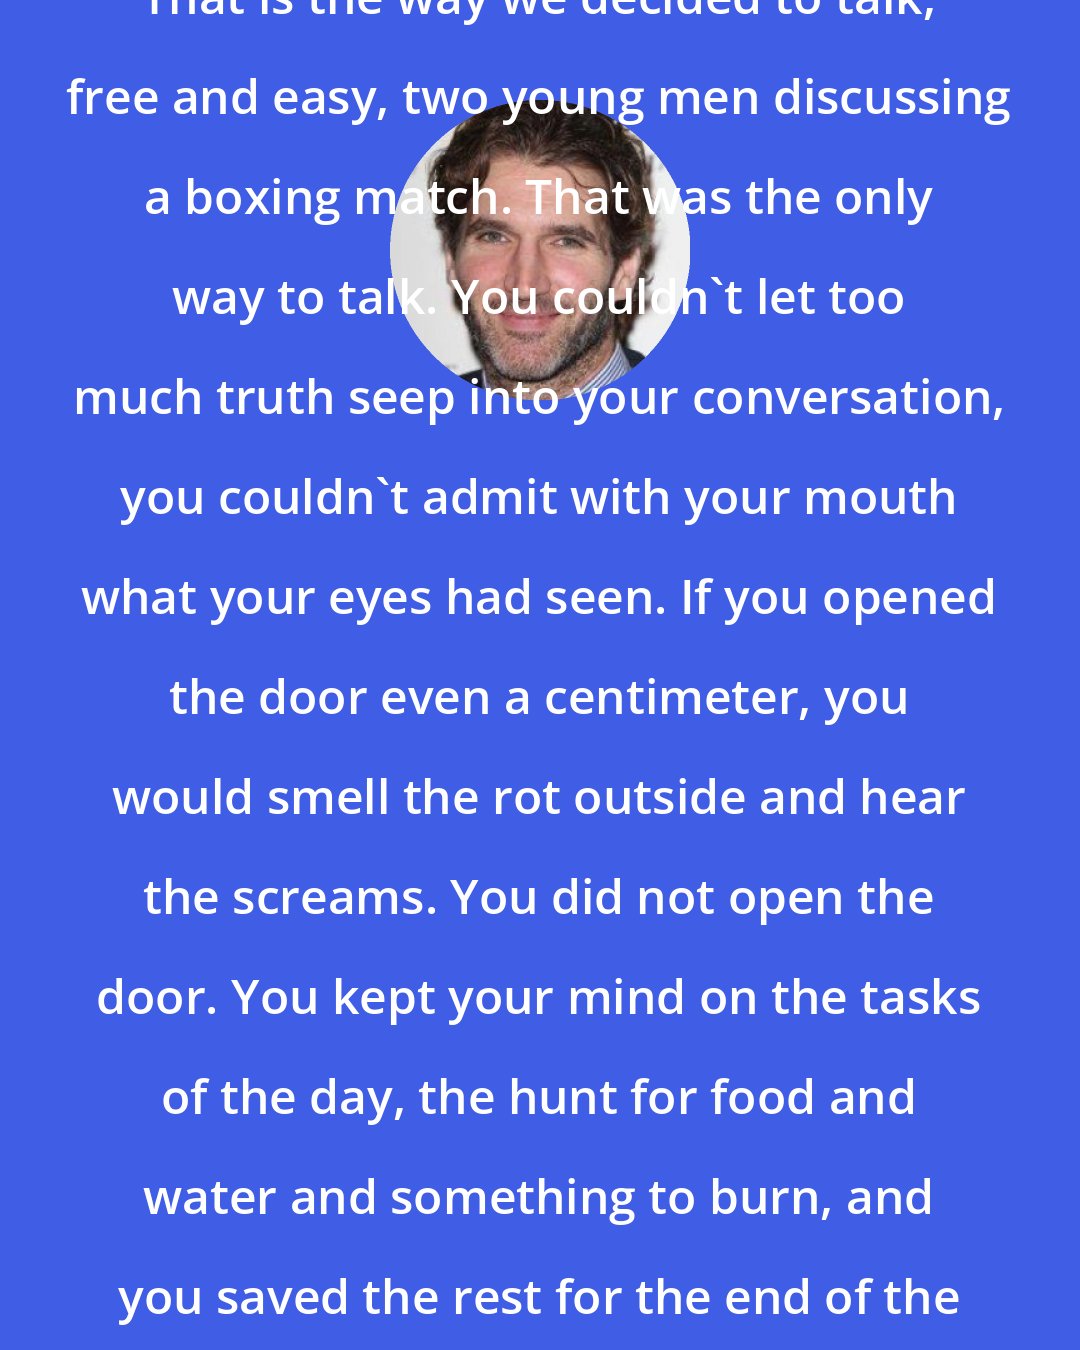 David Benioff: That is the way we decided to talk, free and easy, two young men discussing a boxing match. That was the only way to talk. You couldn't let too much truth seep into your conversation, you couldn't admit with your mouth what your eyes had seen. If you opened the door even a centimeter, you would smell the rot outside and hear the screams. You did not open the door. You kept your mind on the tasks of the day, the hunt for food and water and something to burn, and you saved the rest for the end of the war.